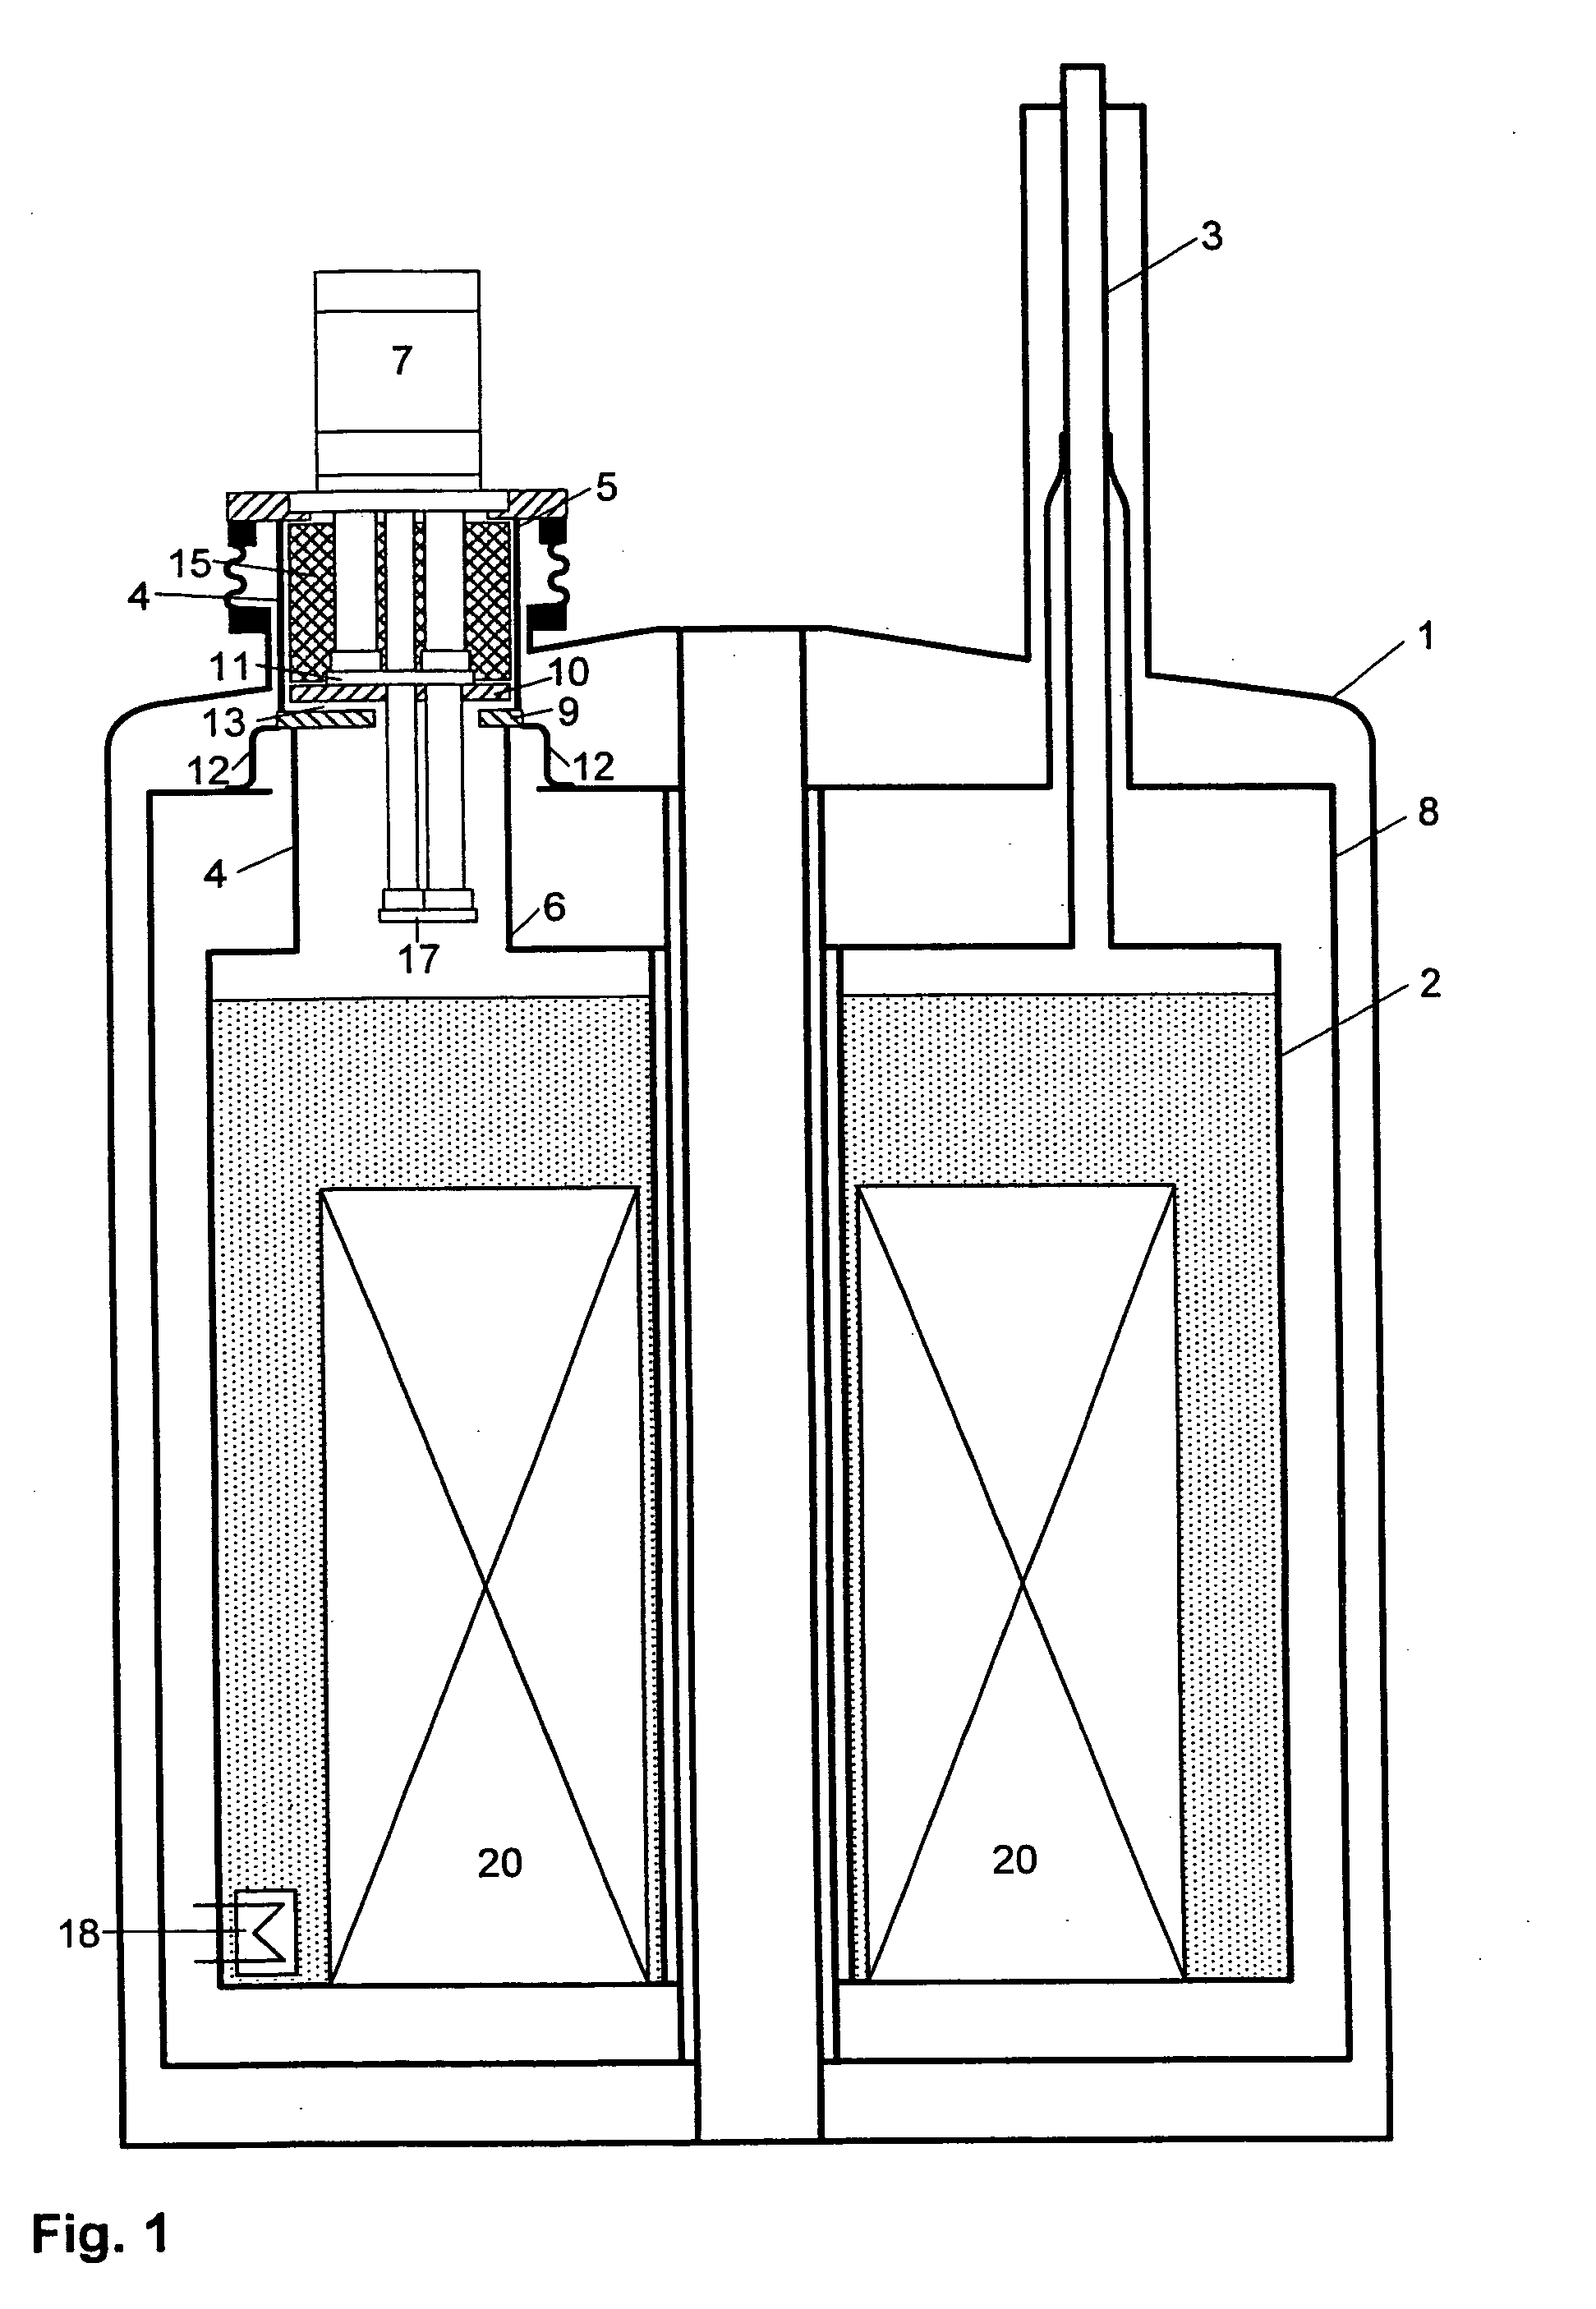 Cryostat configuration with cryocooler and gas gap heat transfer device